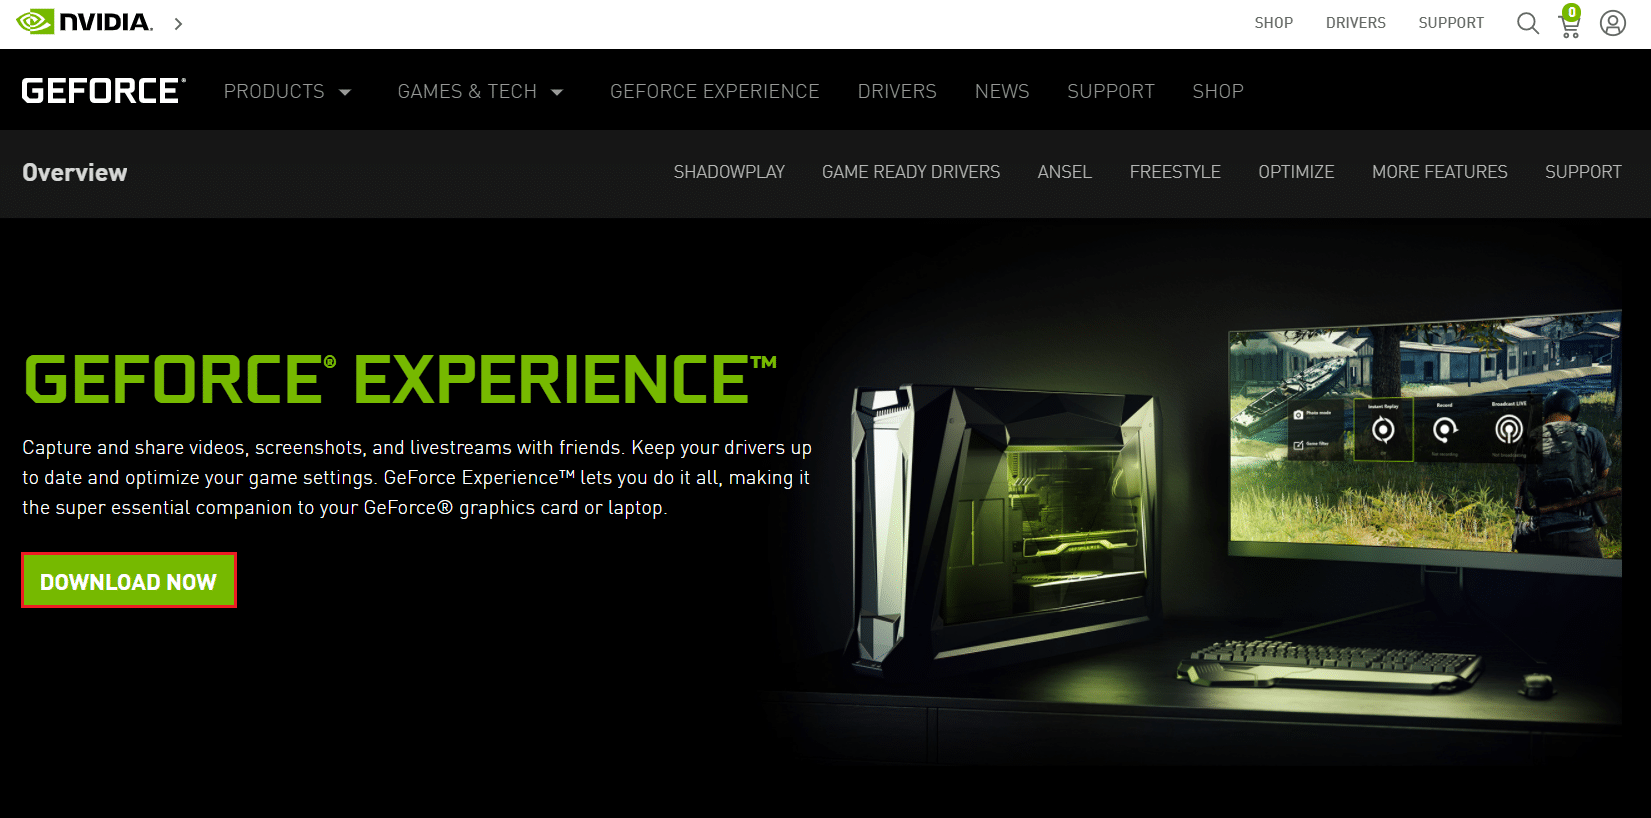 download NVIDIA GeForce from official website